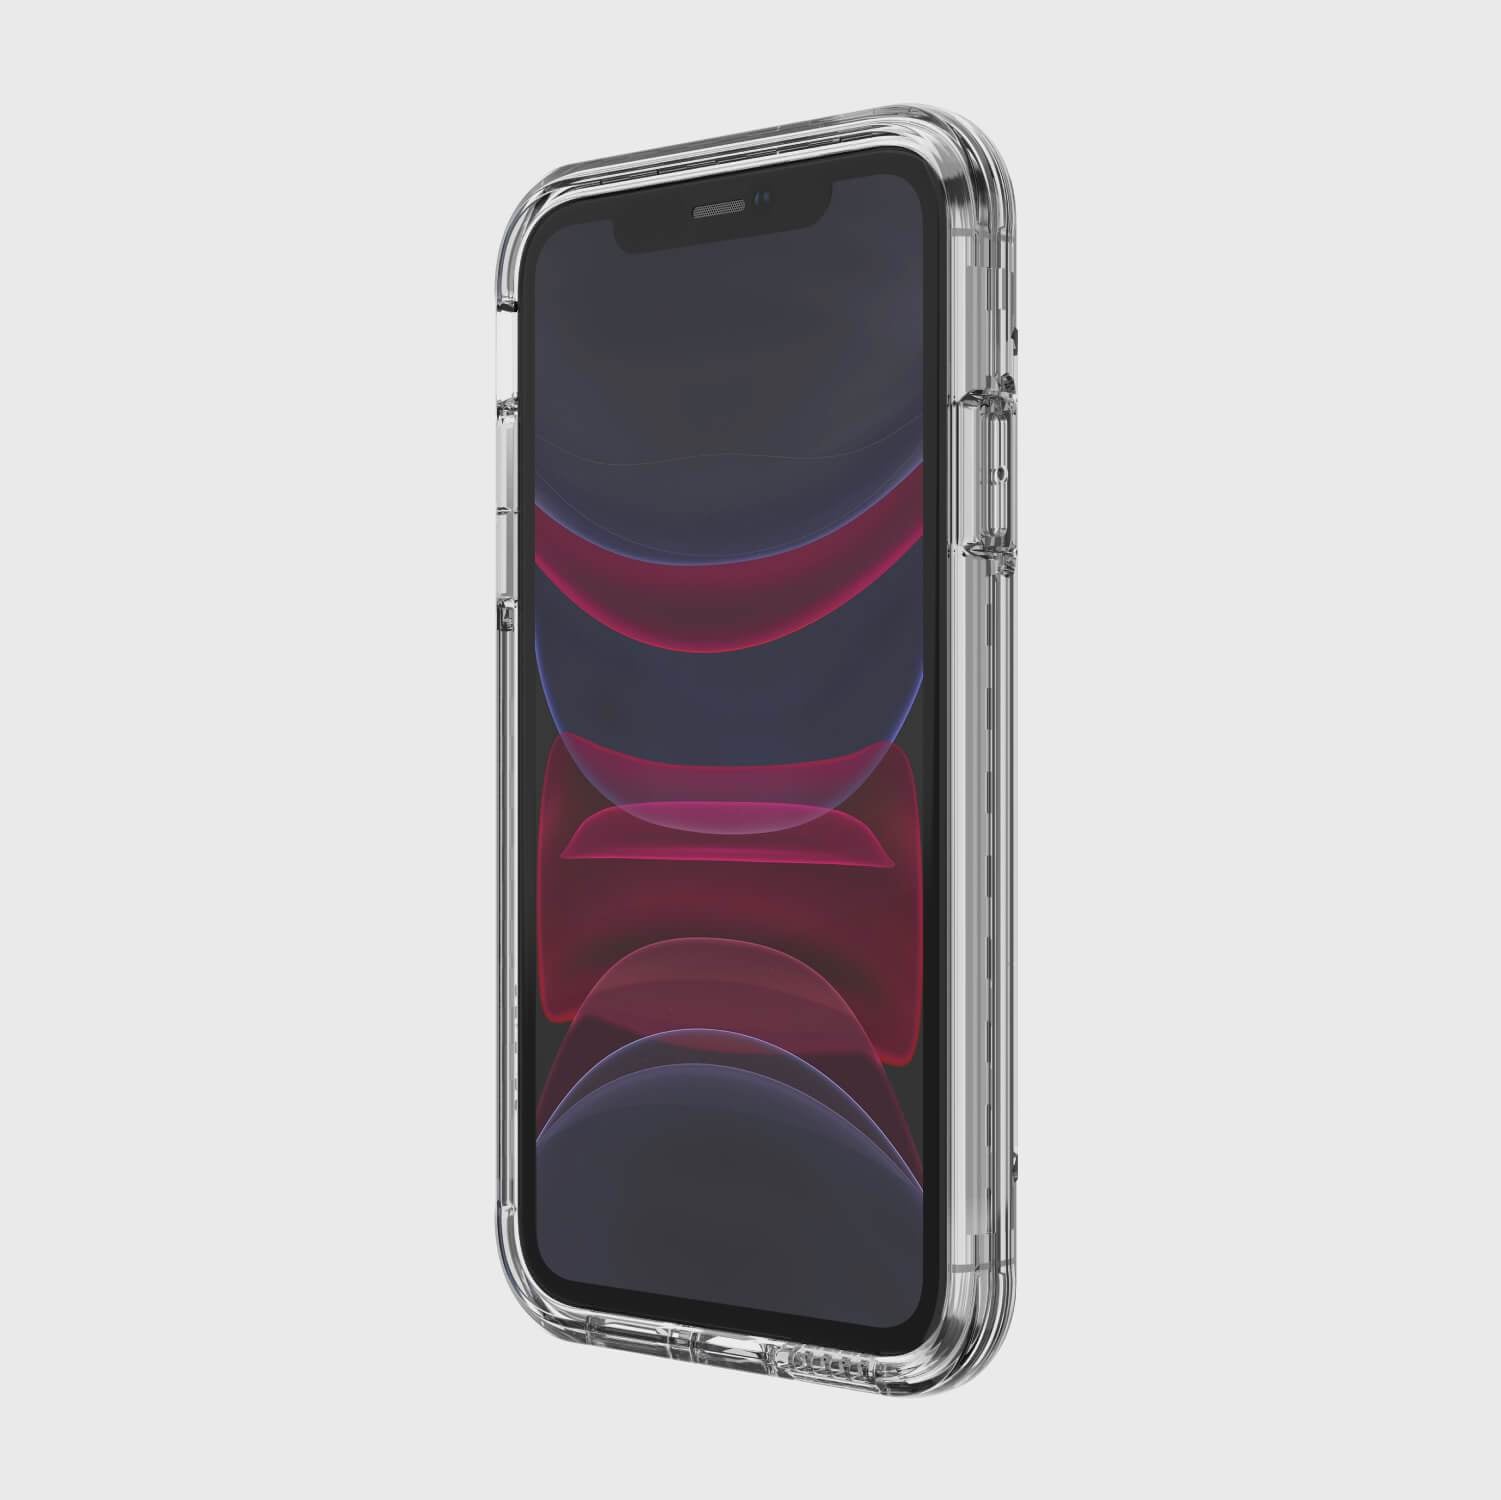 The back view of a Raptic Air iPhone 11 Pro Max case with 13 foot drop protection: The back view of a Raptic Air iPhone 11 Pro Max Case - AIR with 13 foot drop protection.